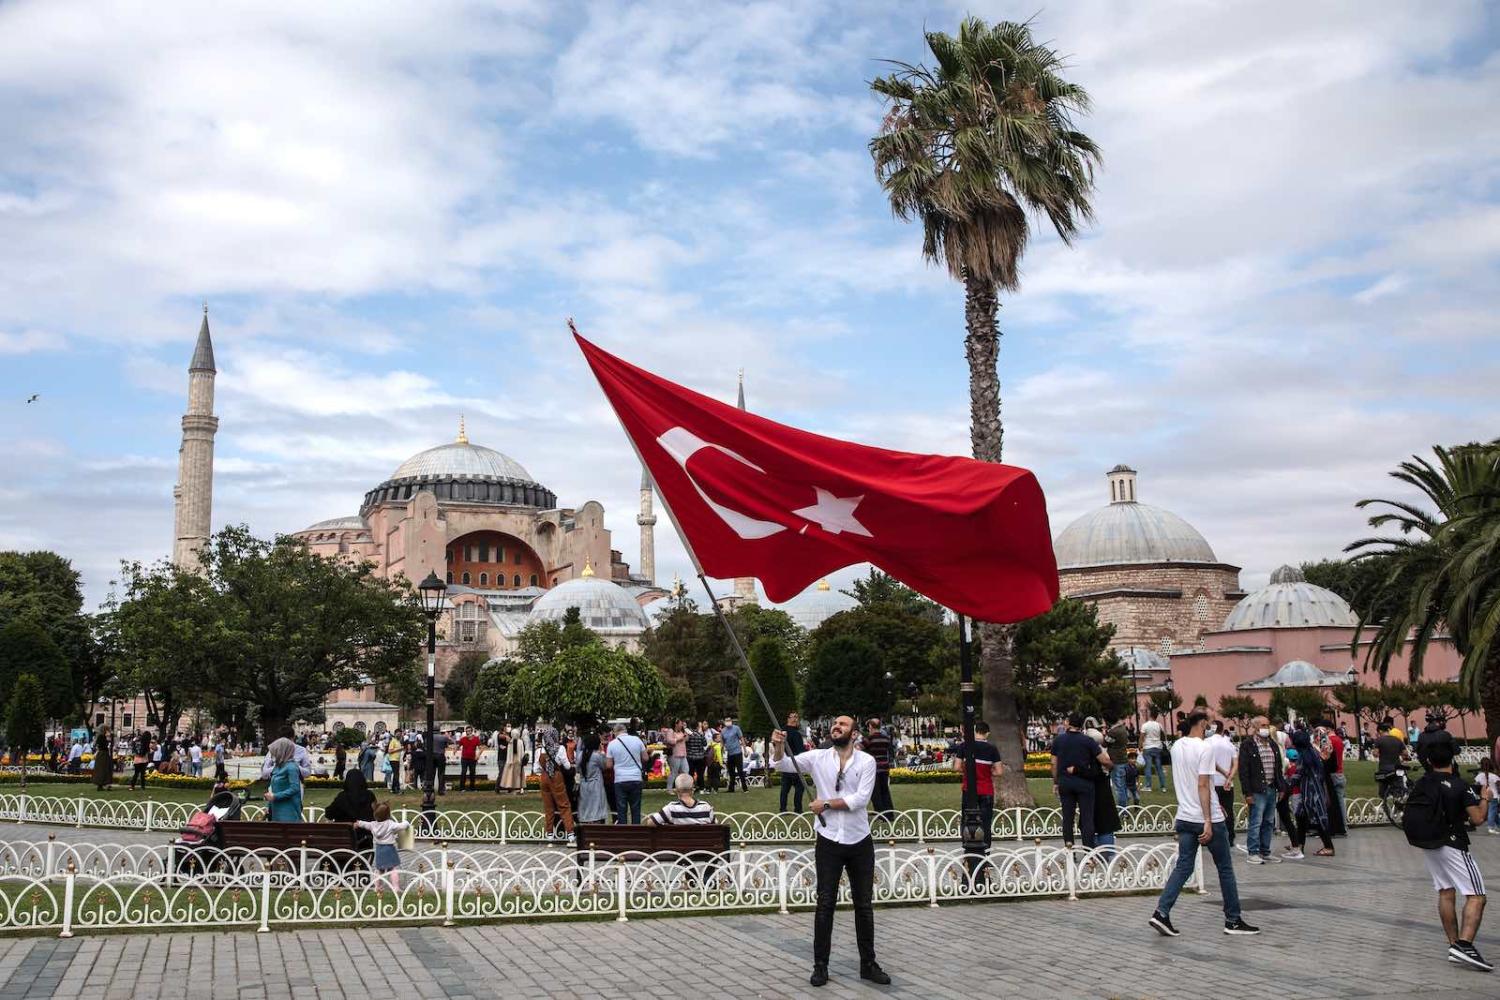 A man waves Turkey's flag near the Hagia Sophia Mosque on the fourth anniversary of the 2016 failed coup attempt, Istanbul, 15 July 2020 (Chris McGrath/Getty Images)